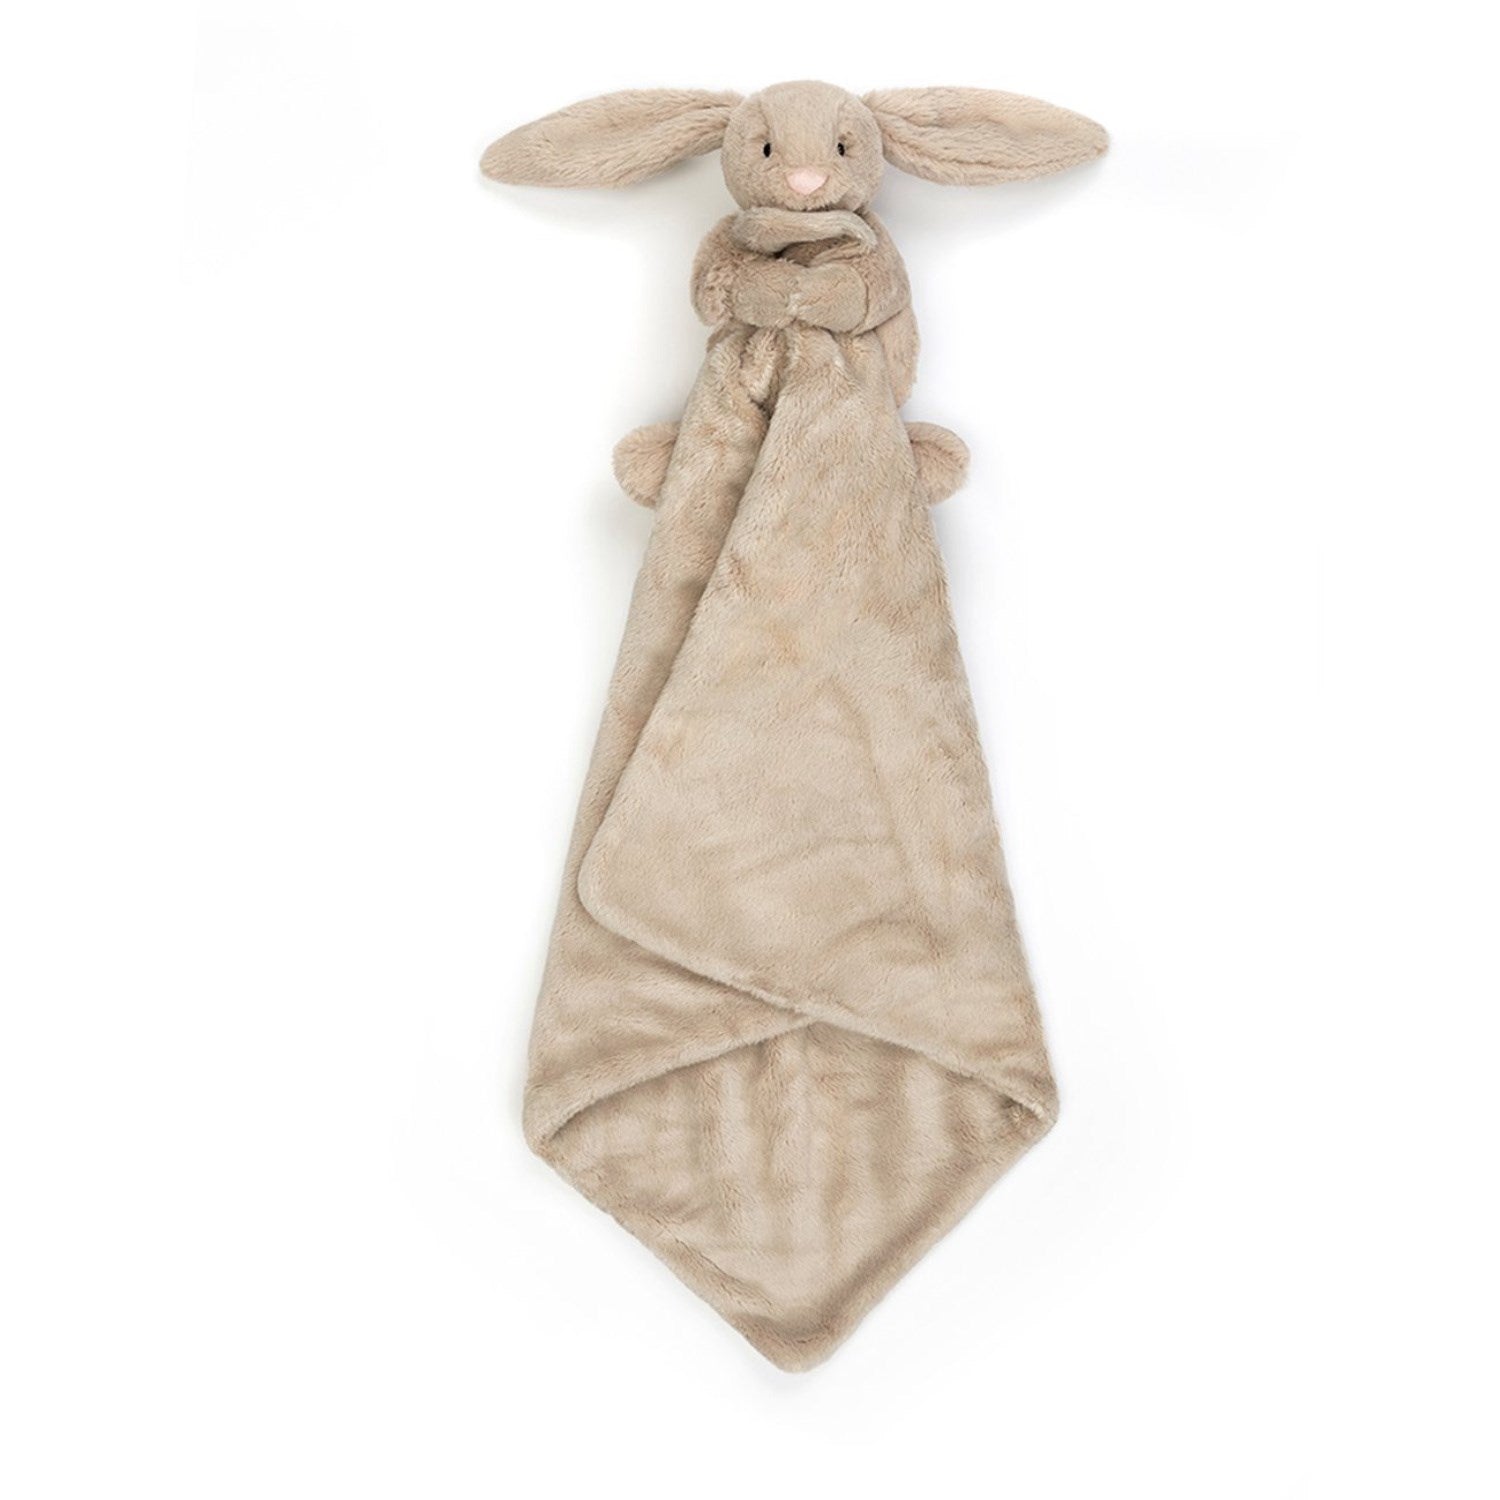 Jellycat Bashful Beige Bunny Soother 2